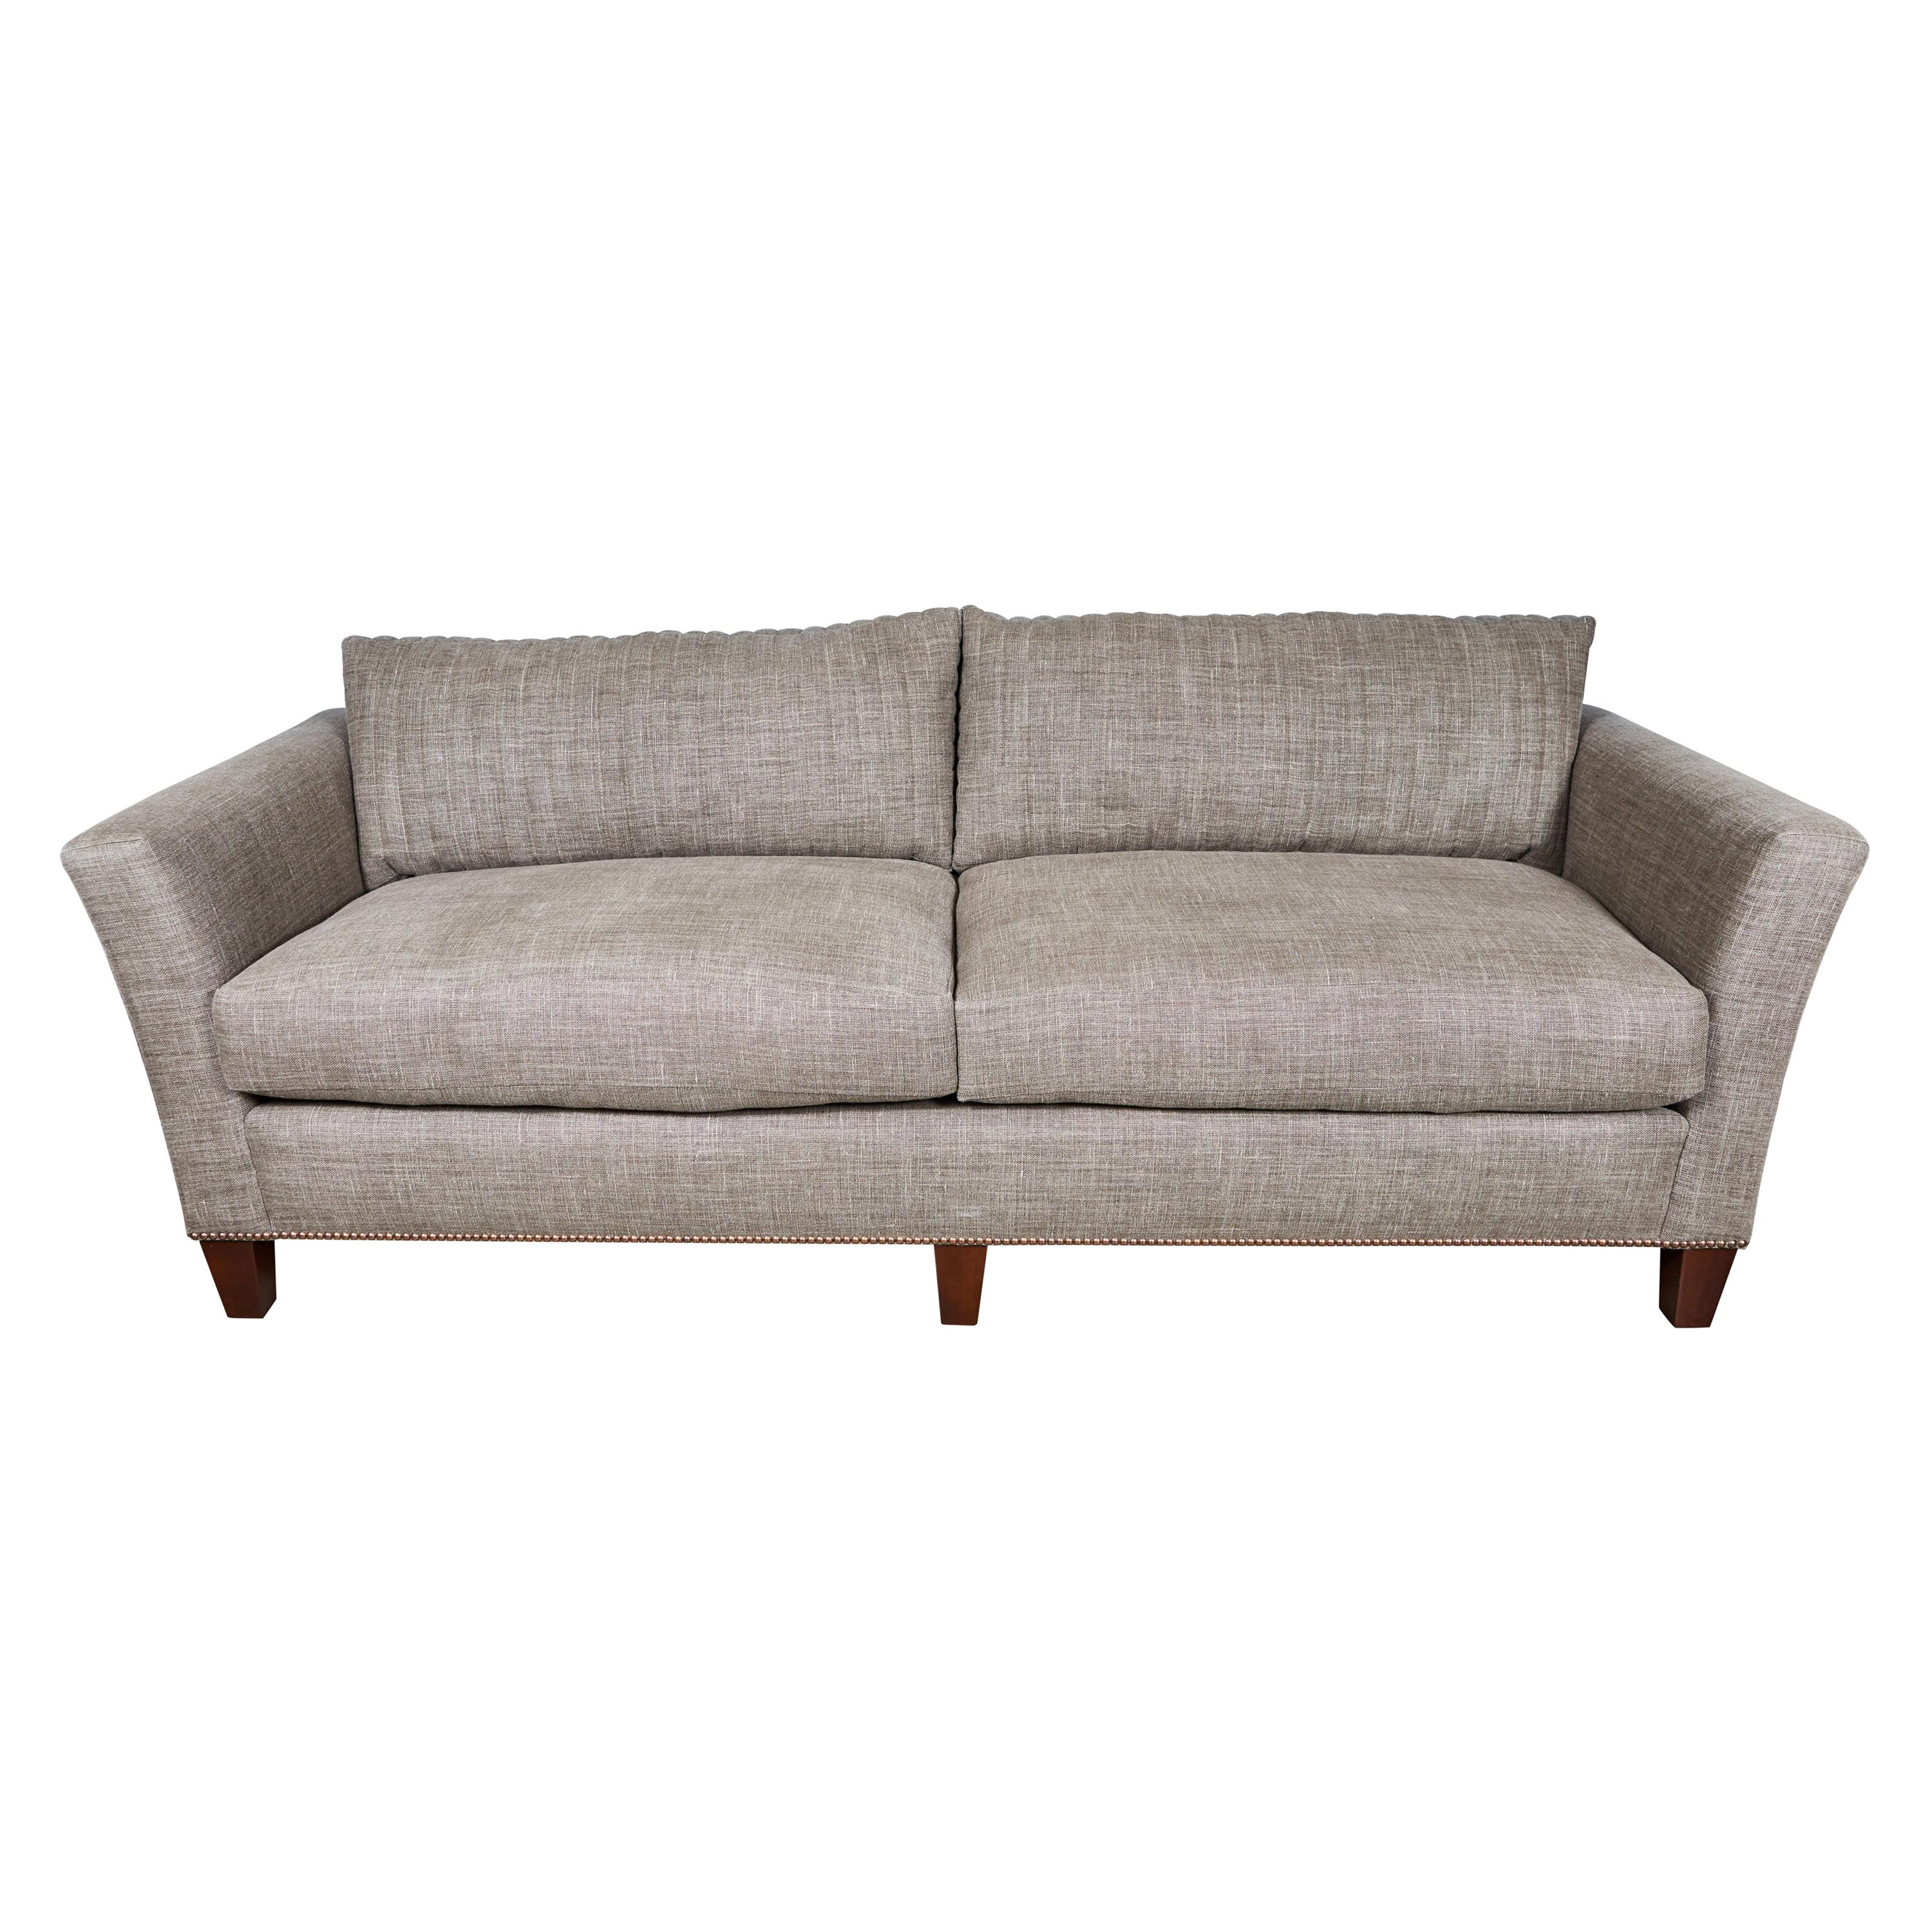 Midcentury Sofa in Belgian Linen with Channel Quilting and Cushions in Down